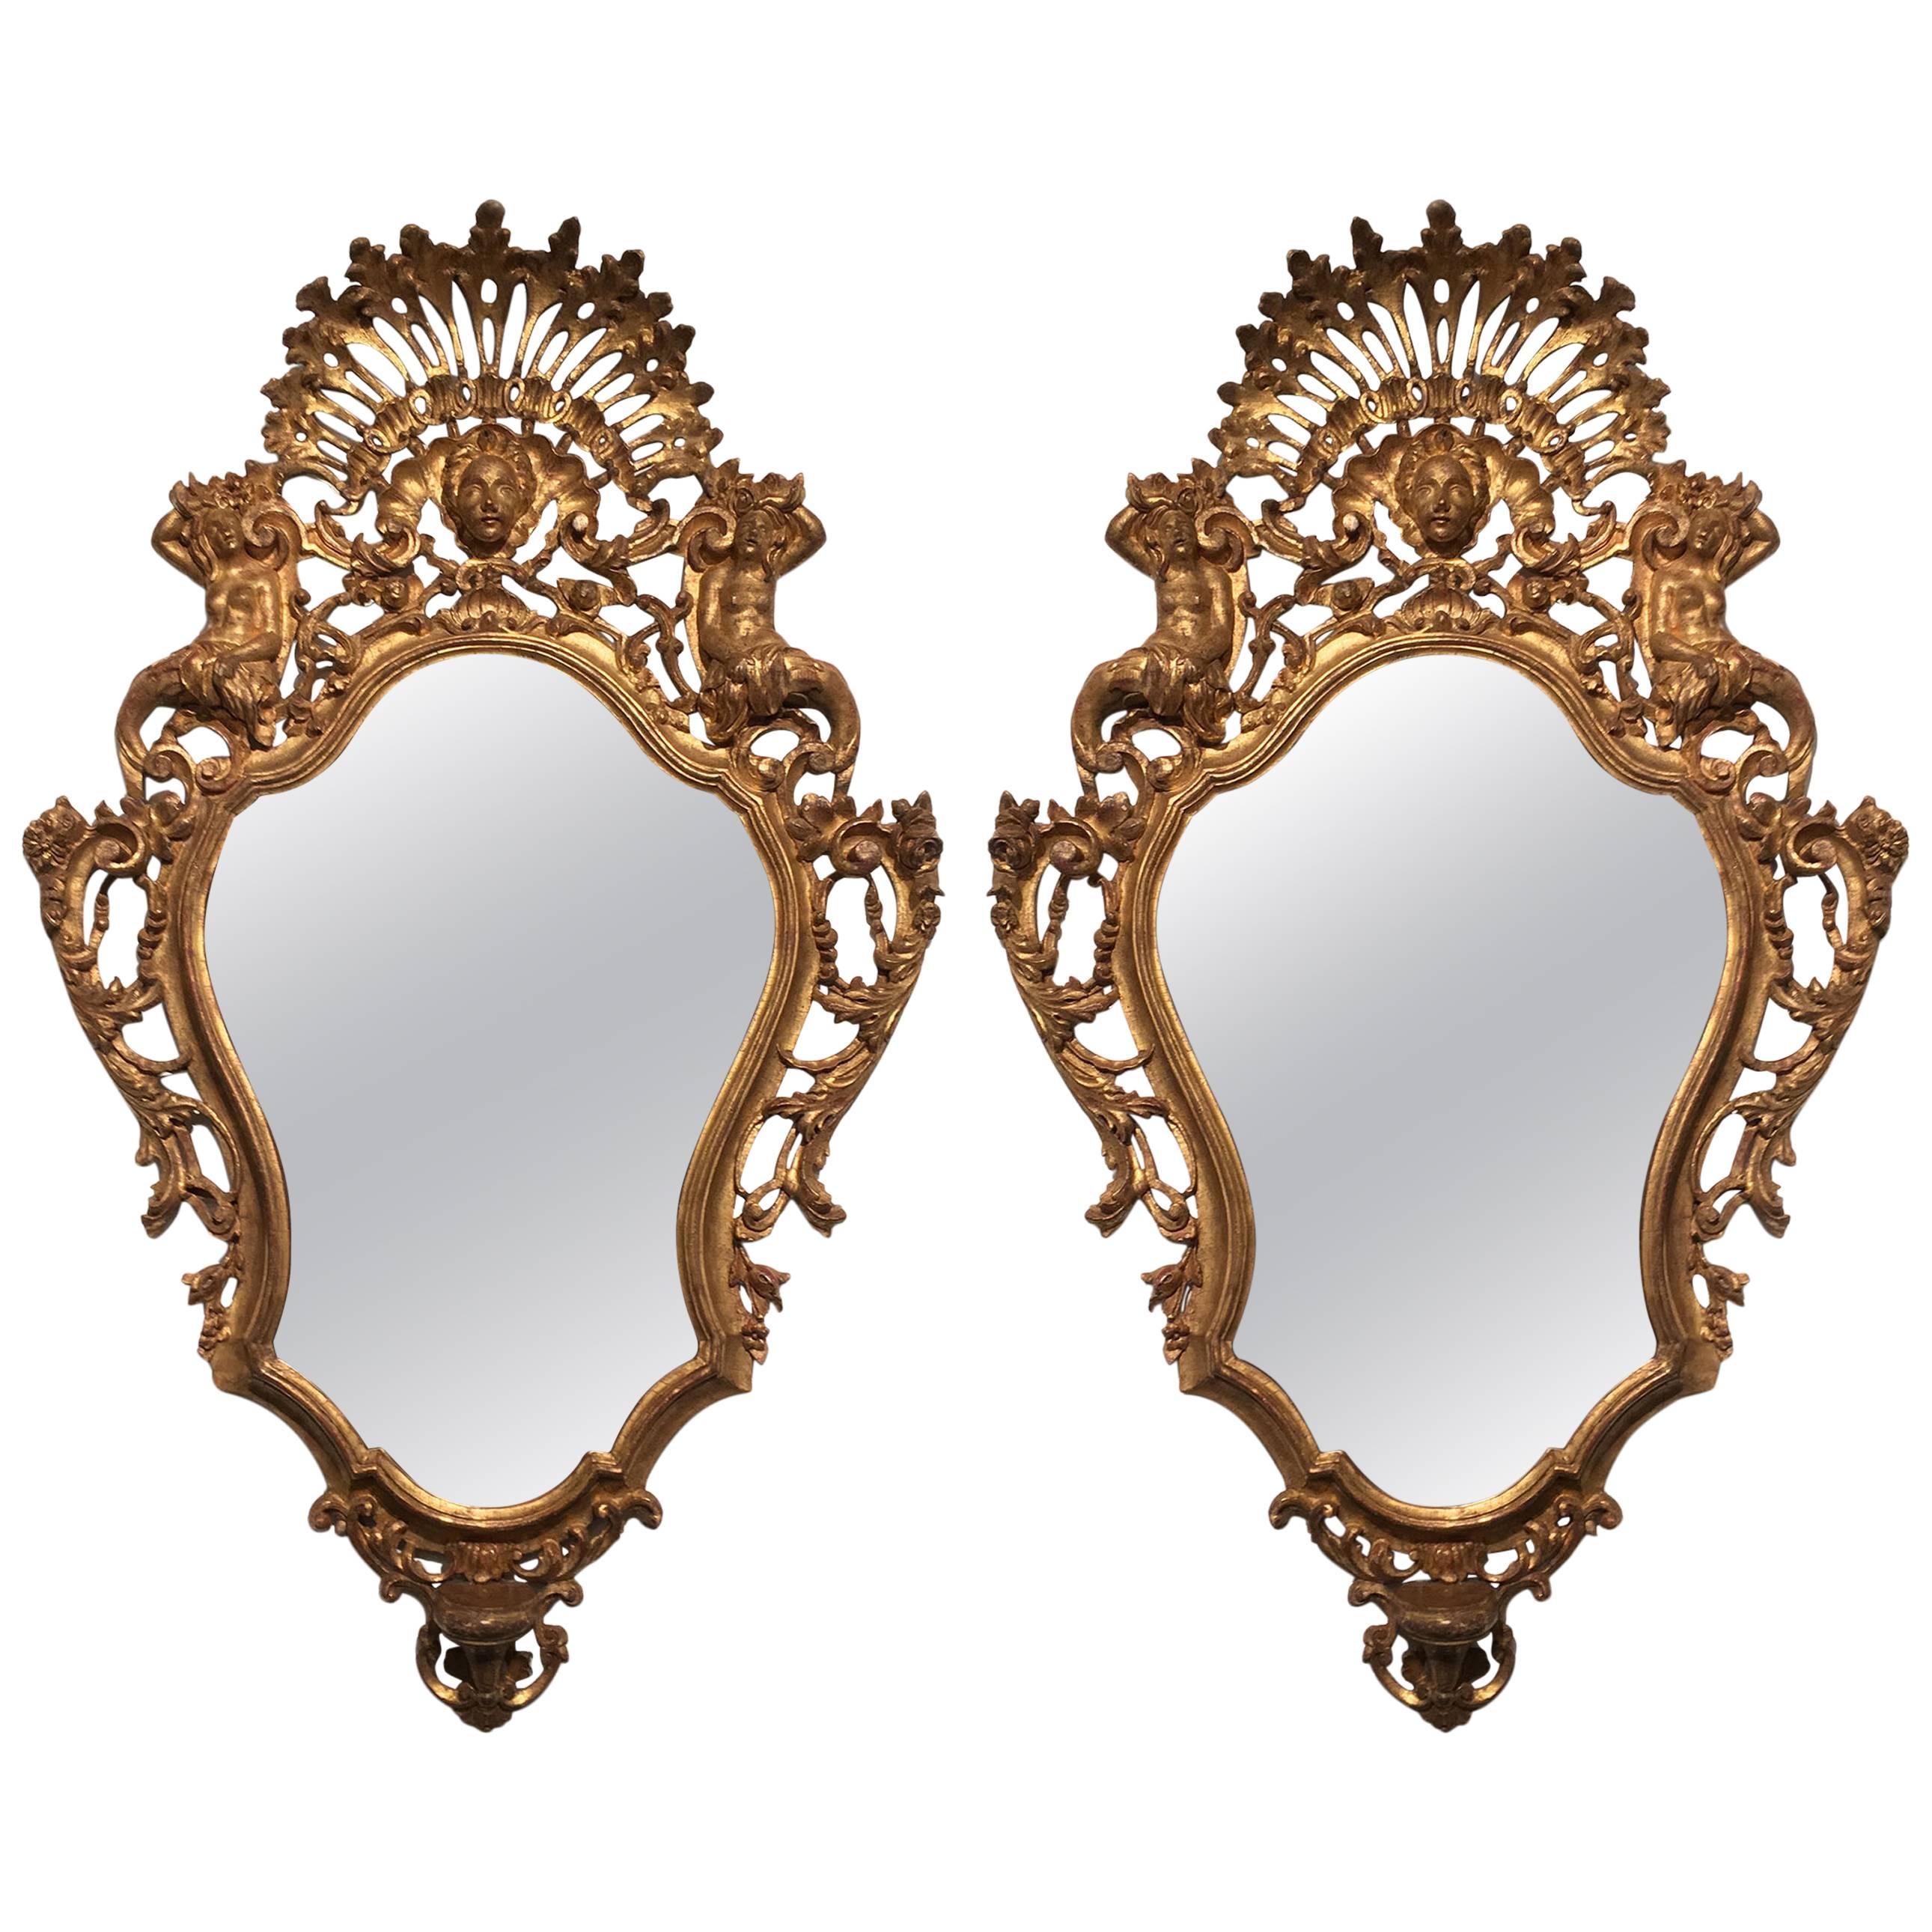 Pair of Italian Rococo Carved Giltwood Wall Mirrors